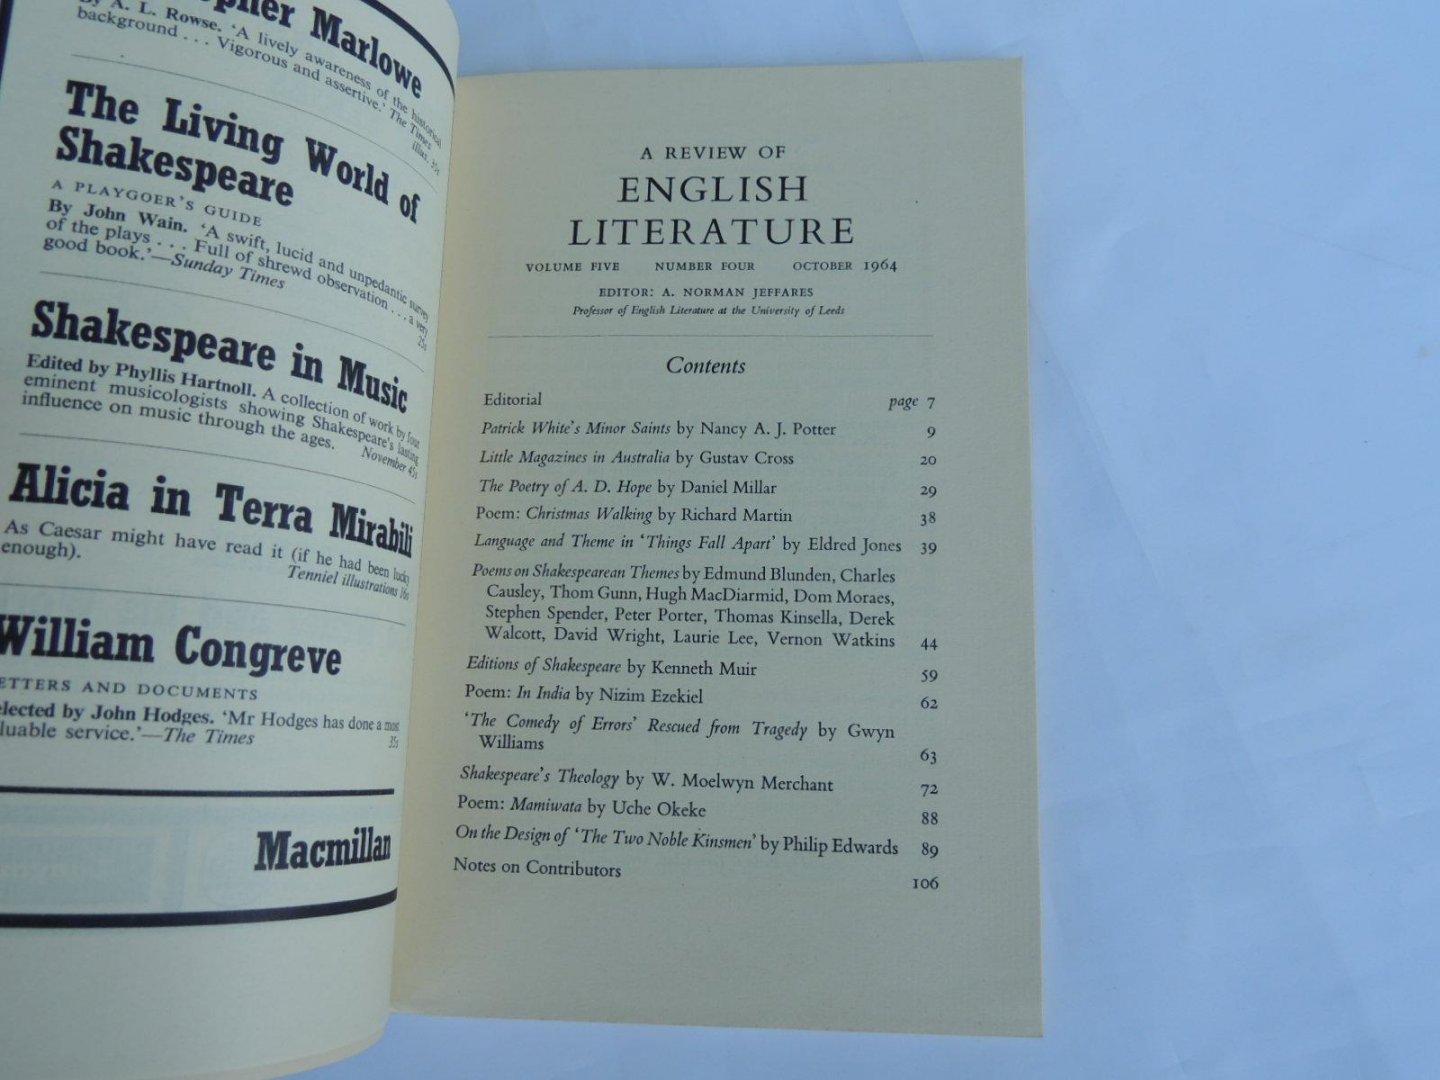 Norman Jeffares - A review of English literature